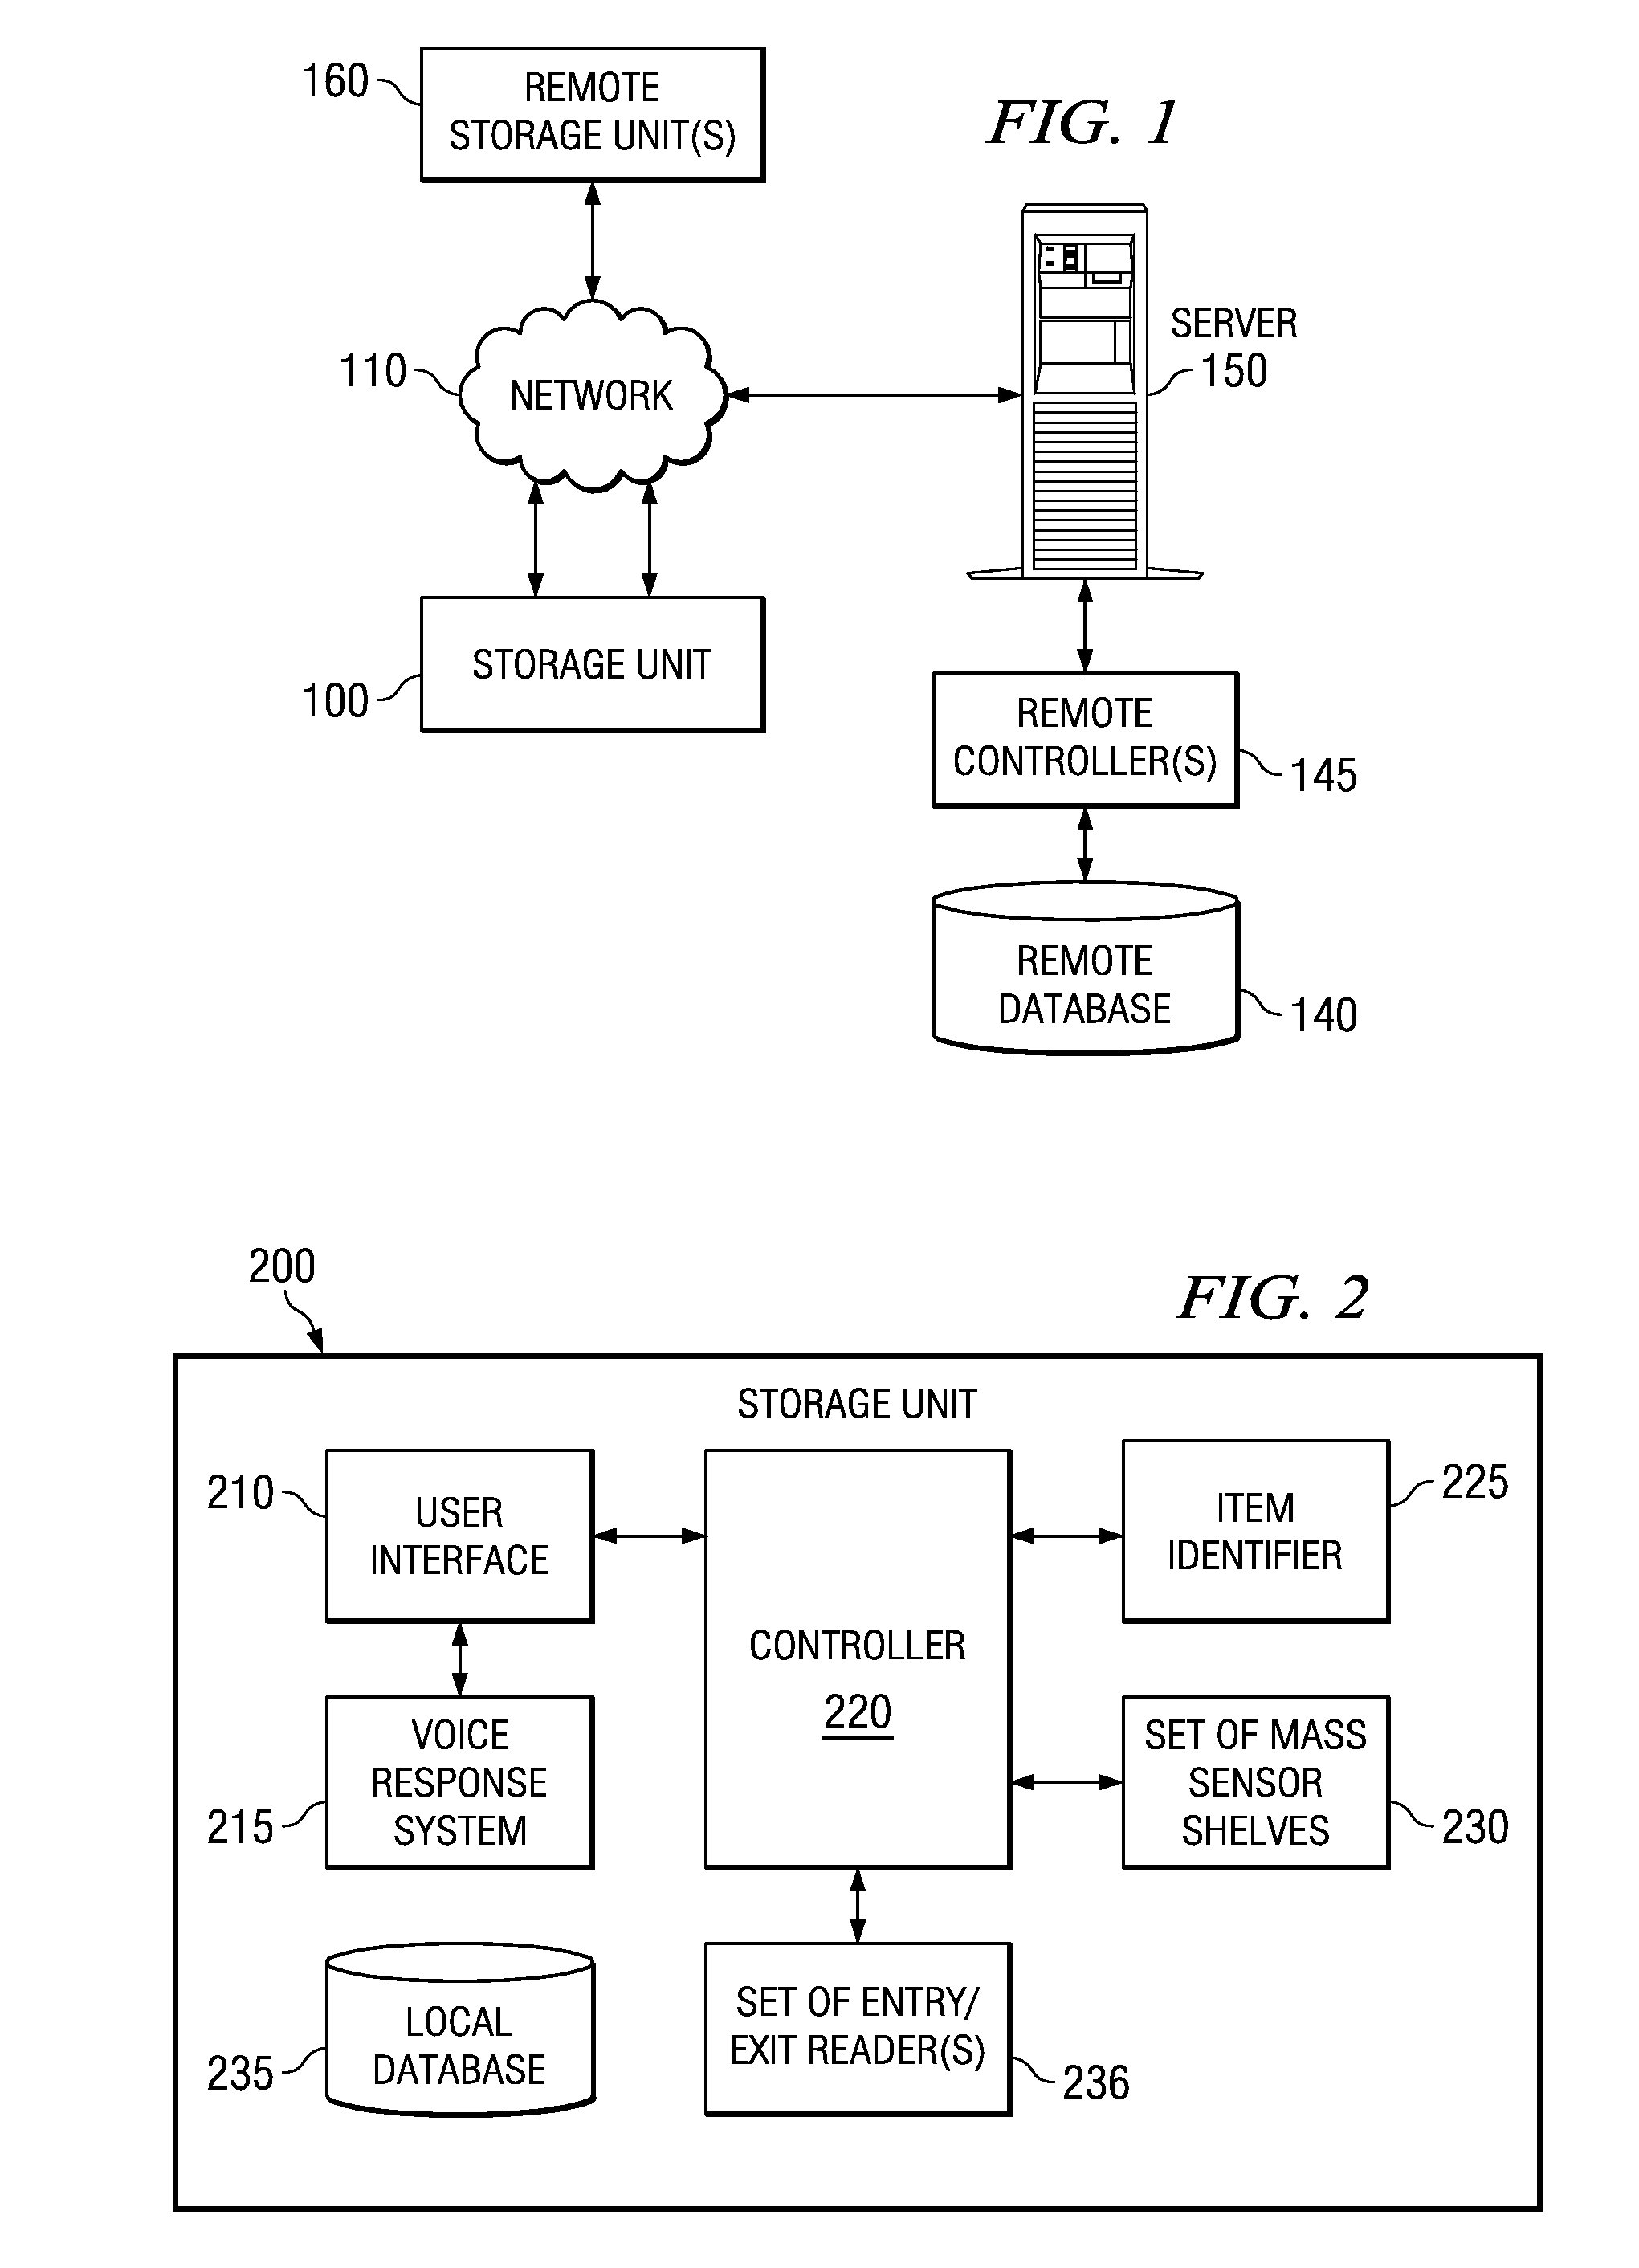 Method and apparatus for tracking usage of an item within a storage unit using location sensors